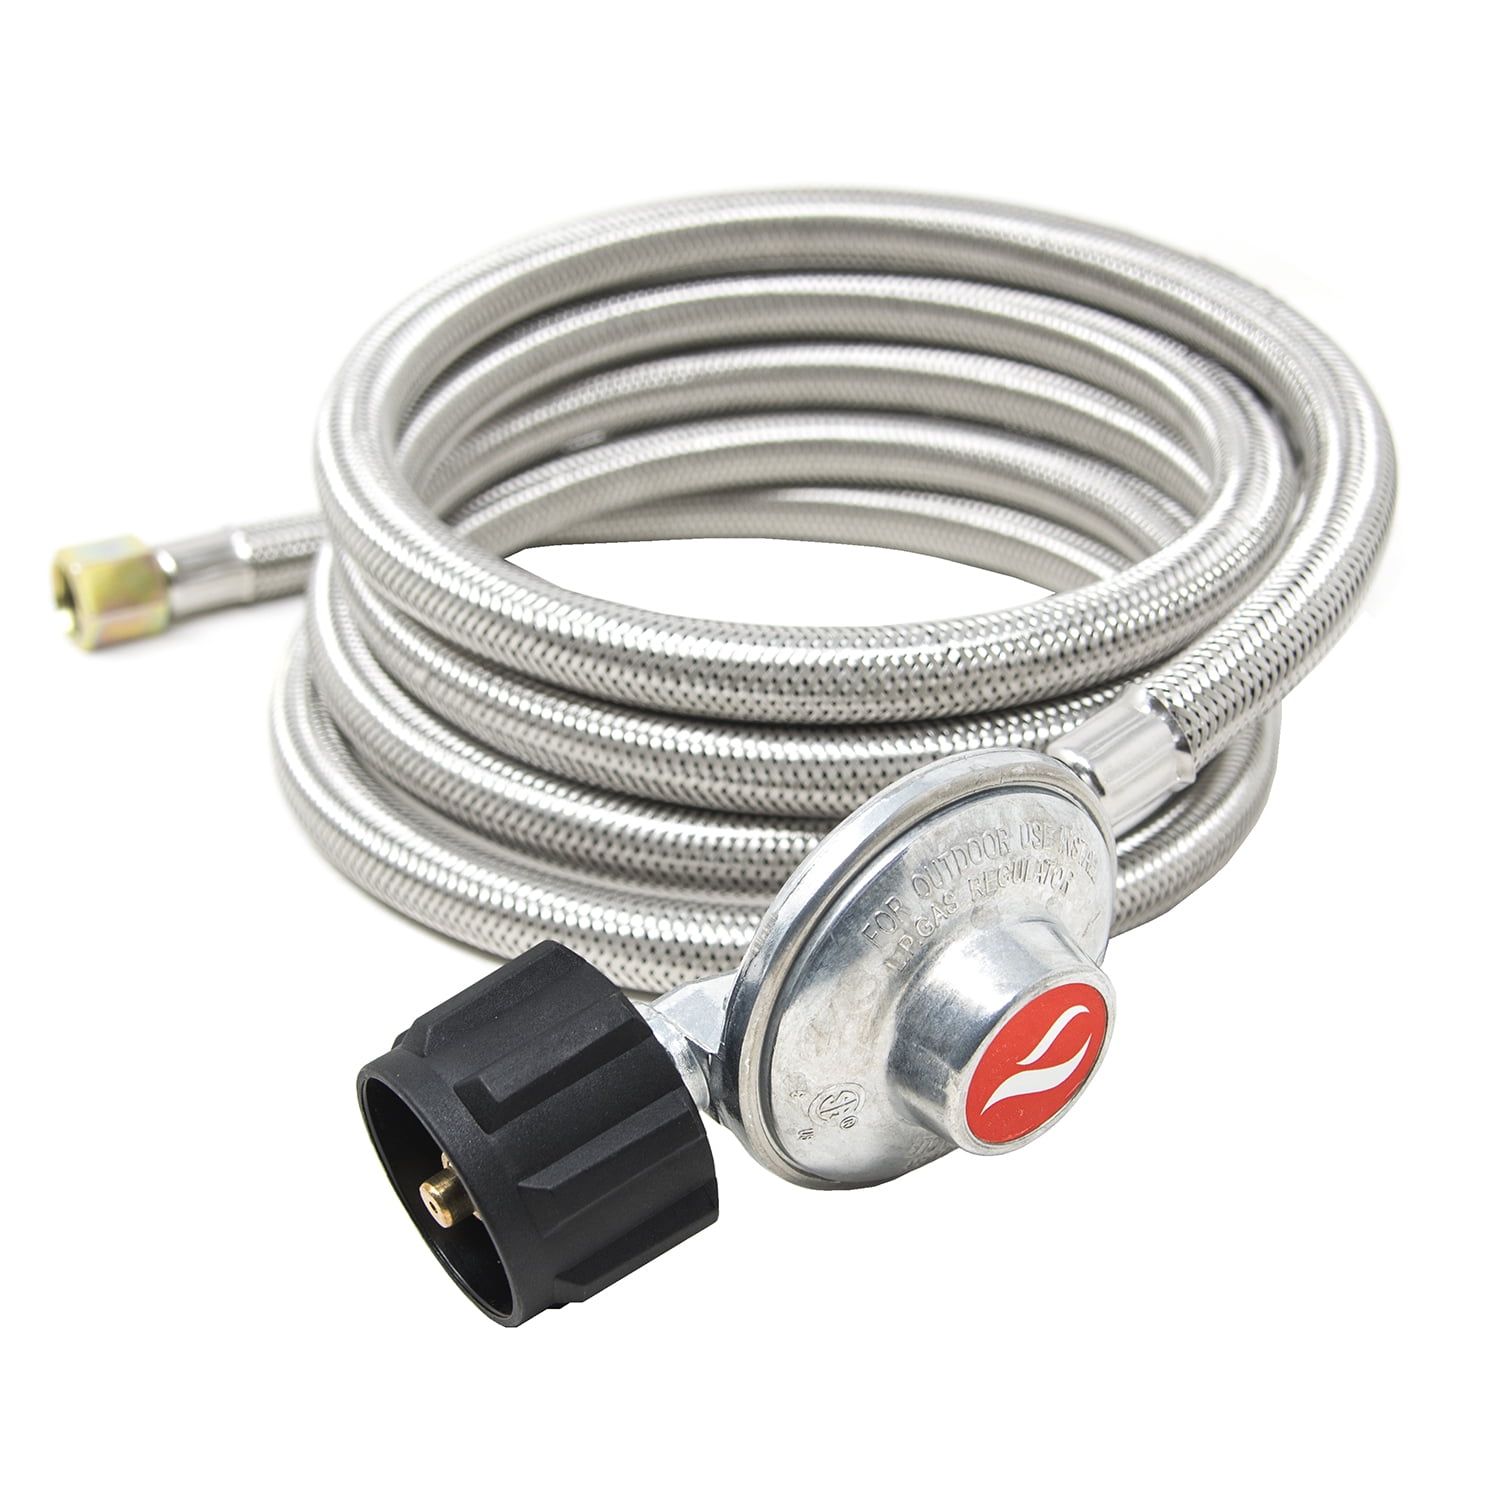 GasSaf 5FT Propane Adapter and Hose Assembly Replacement with Hose for Type1 LP Tank and Gas Grill-CSA Certified 2-Pack